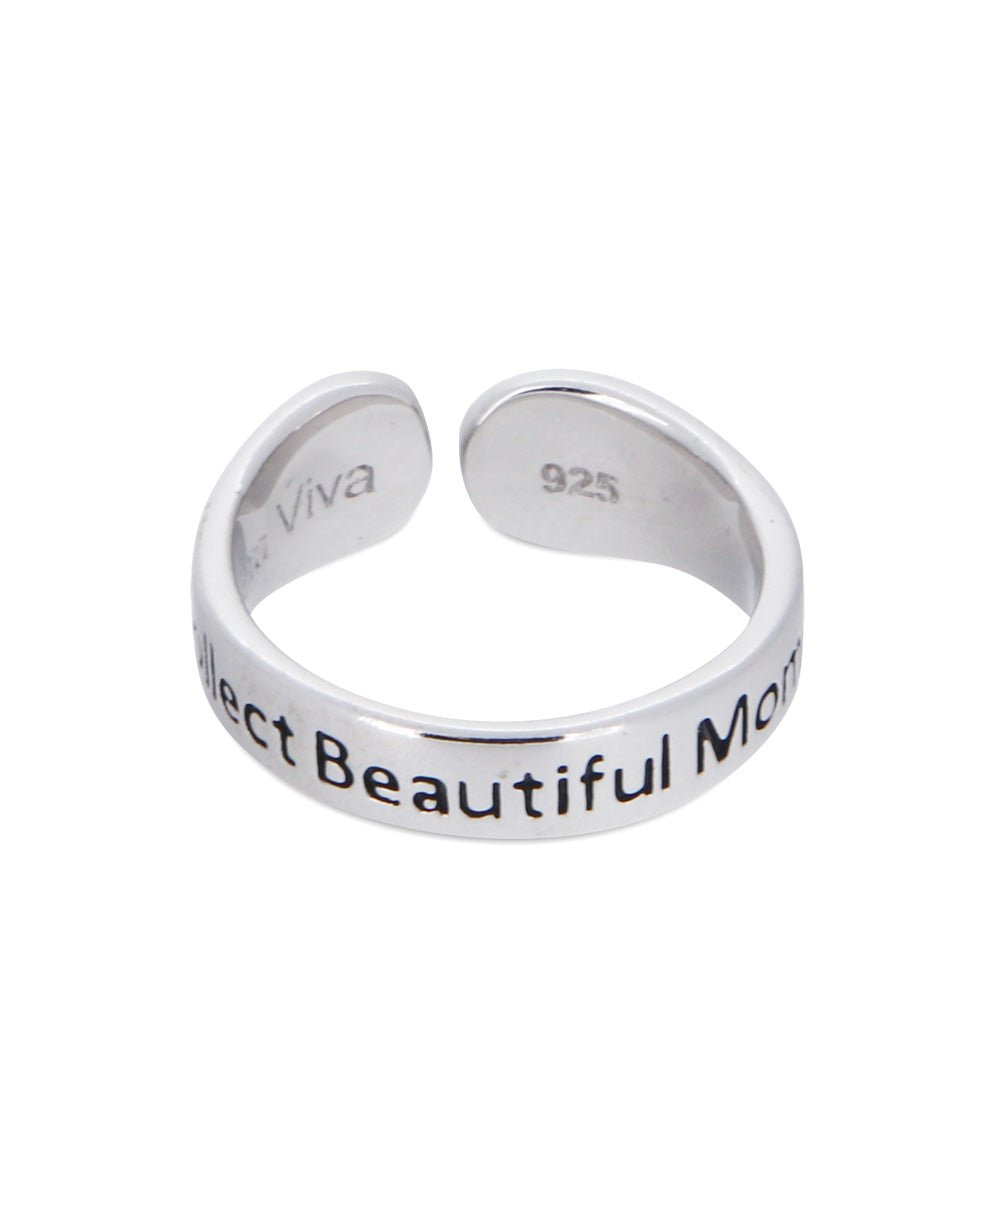 Collect Beautiful Moments Dandelion Sterling Silver Adjustable Ring - Rings